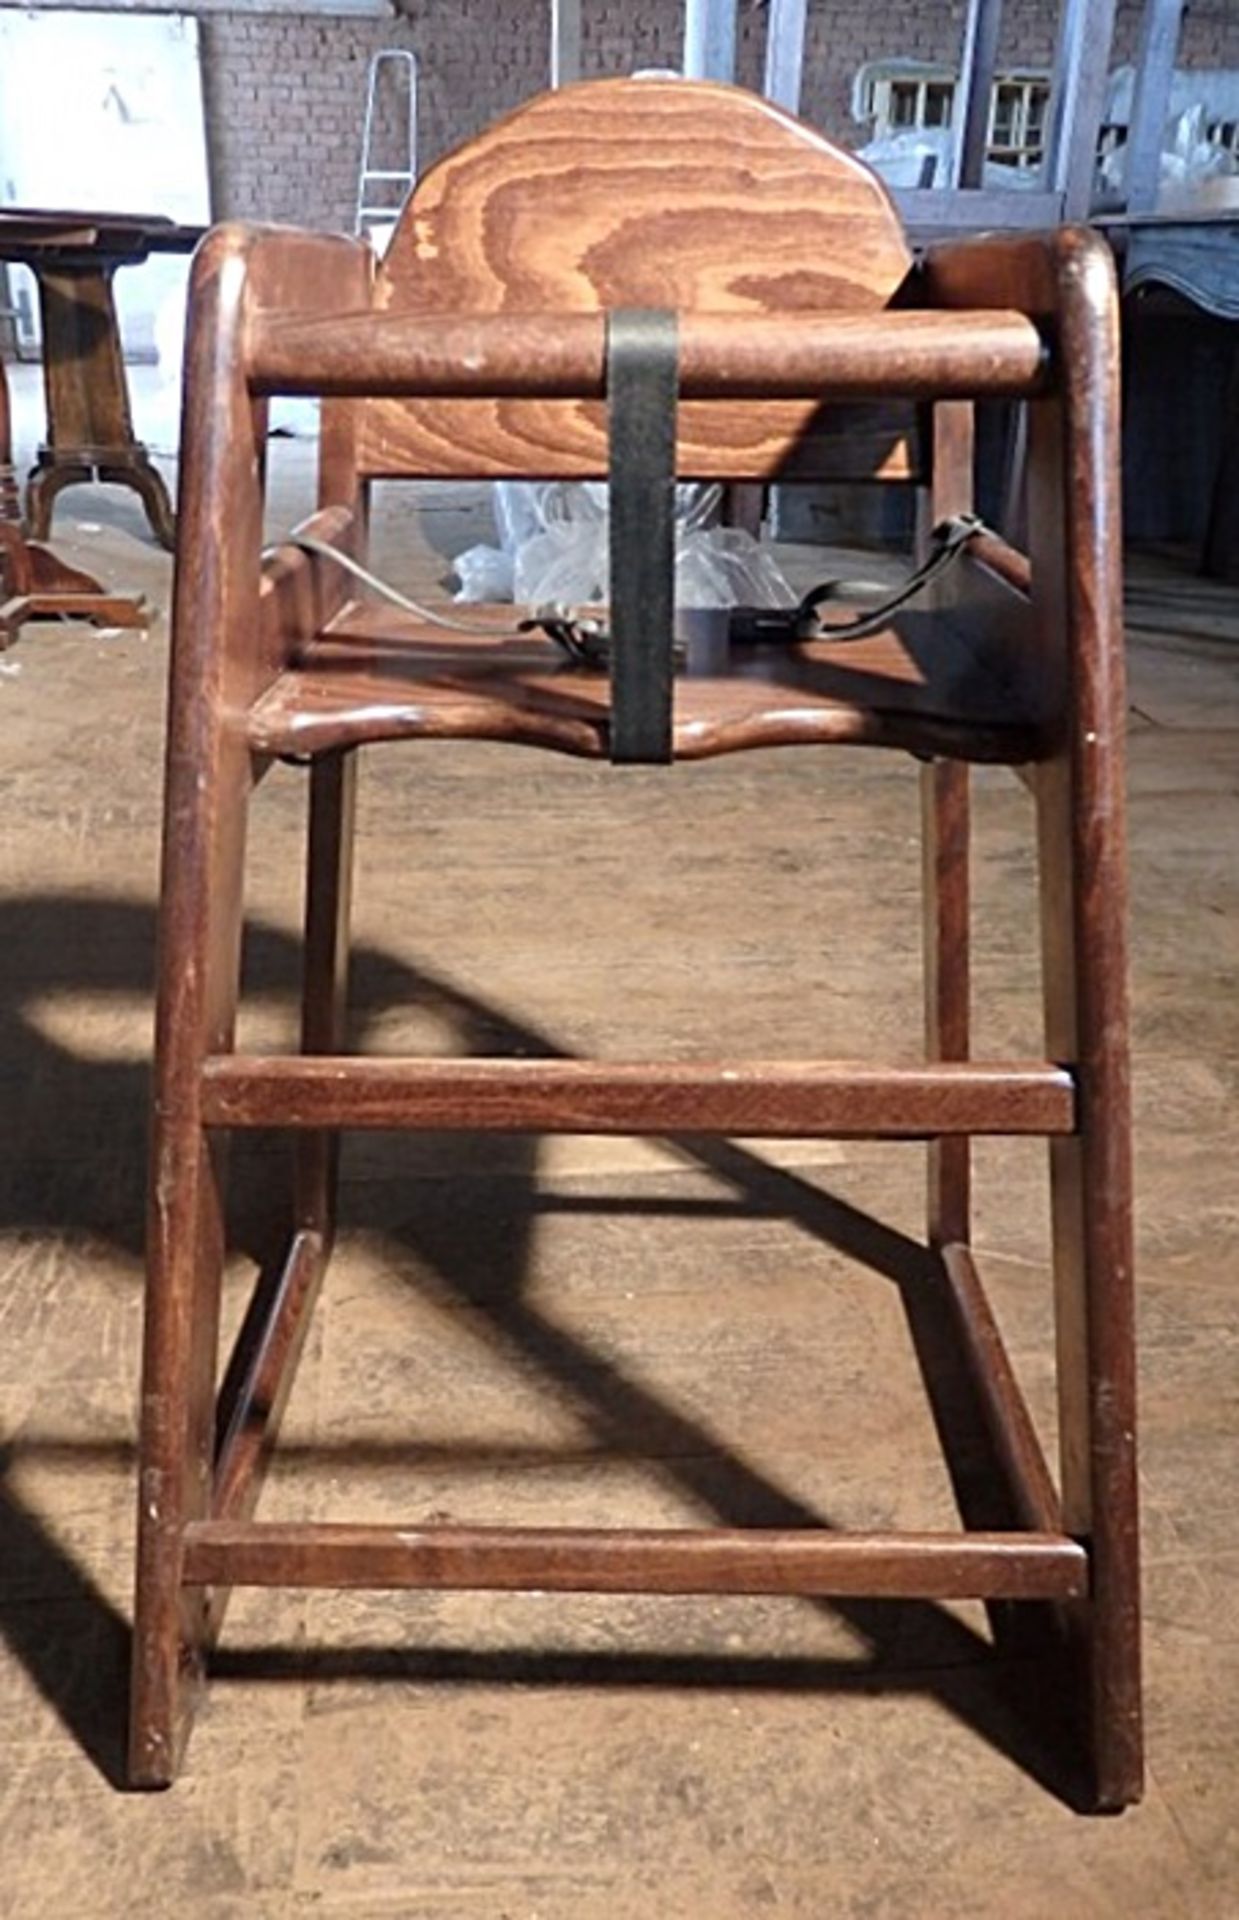 1 x Solid Wood Childs High Chair - All Recently Taken From A Bar & Restaurant Environment - - Image 8 of 8